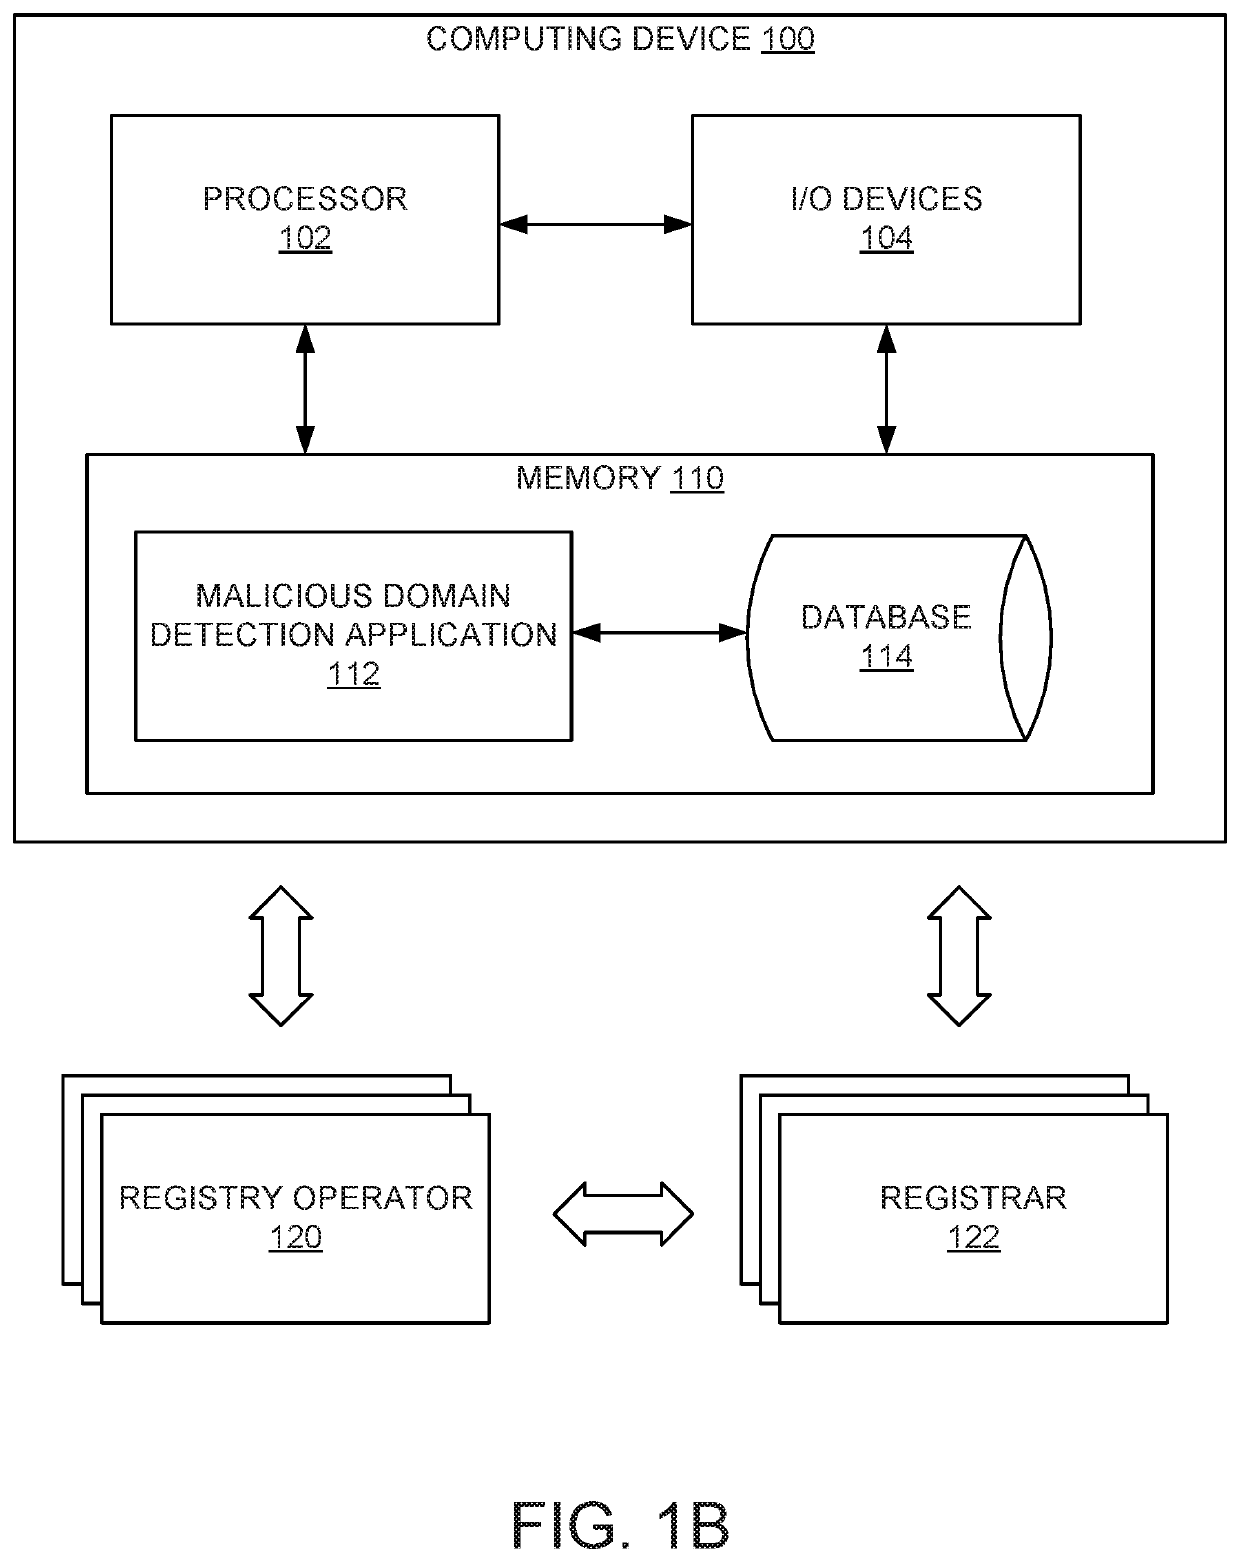 Early detection of risky domains via registration profiling